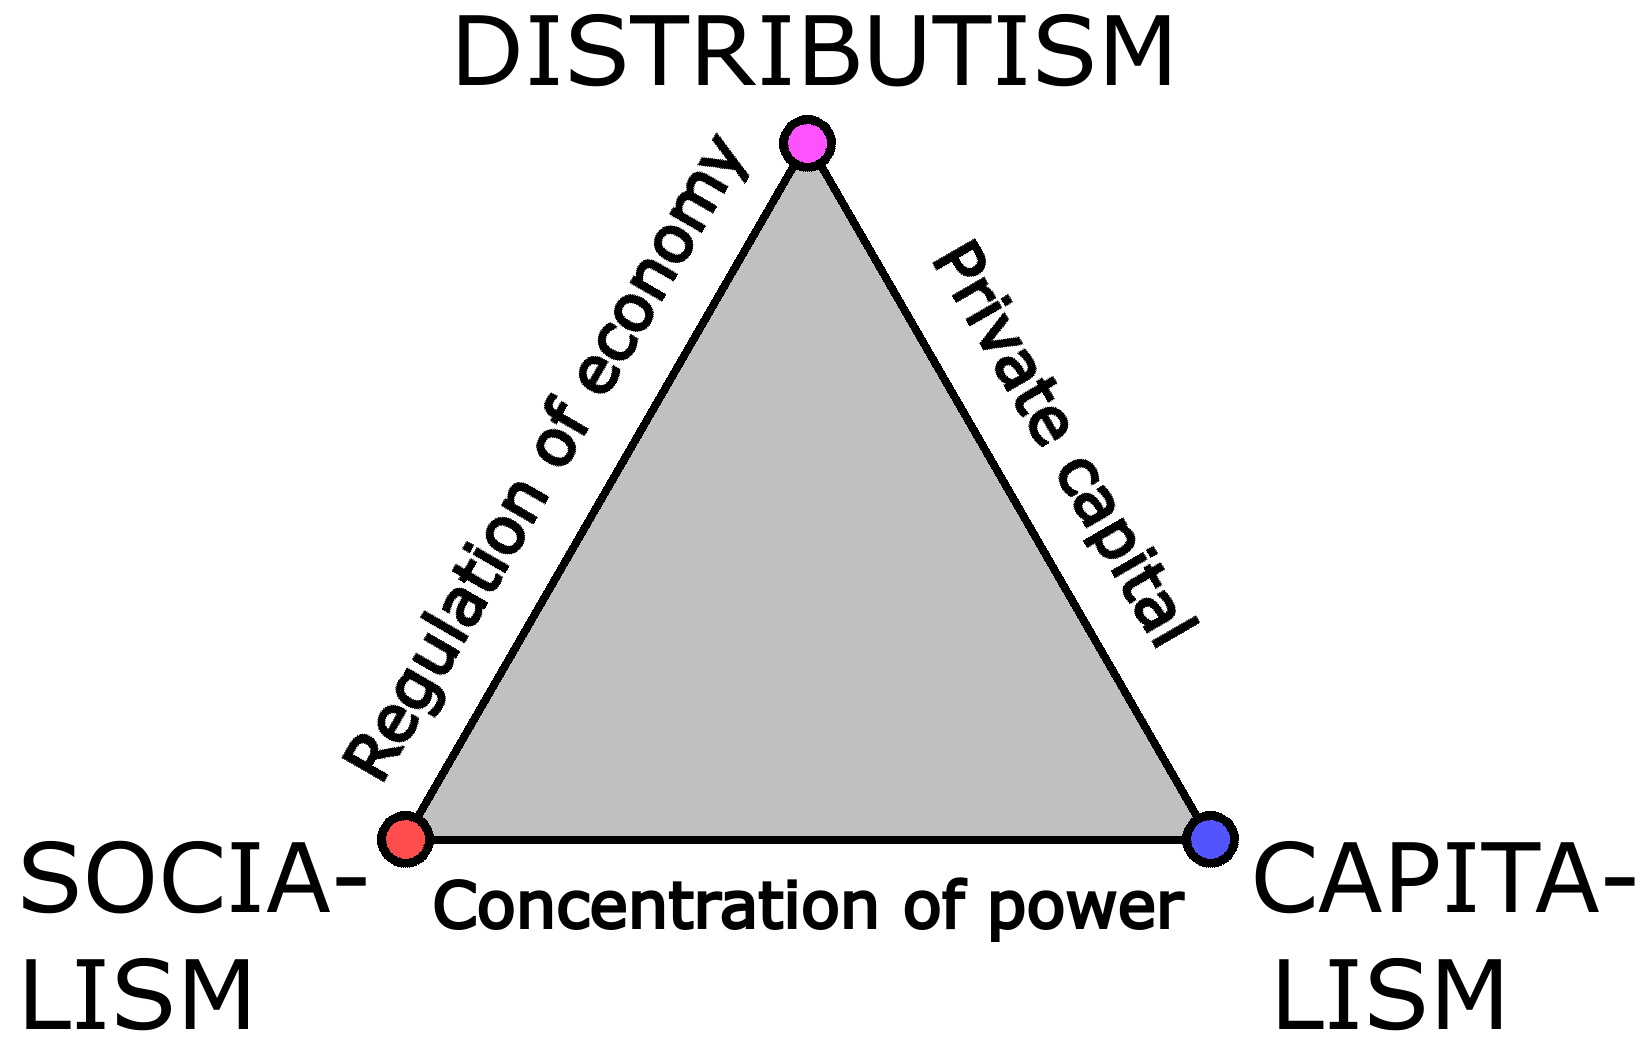 Triangle_of_economic_systems.png